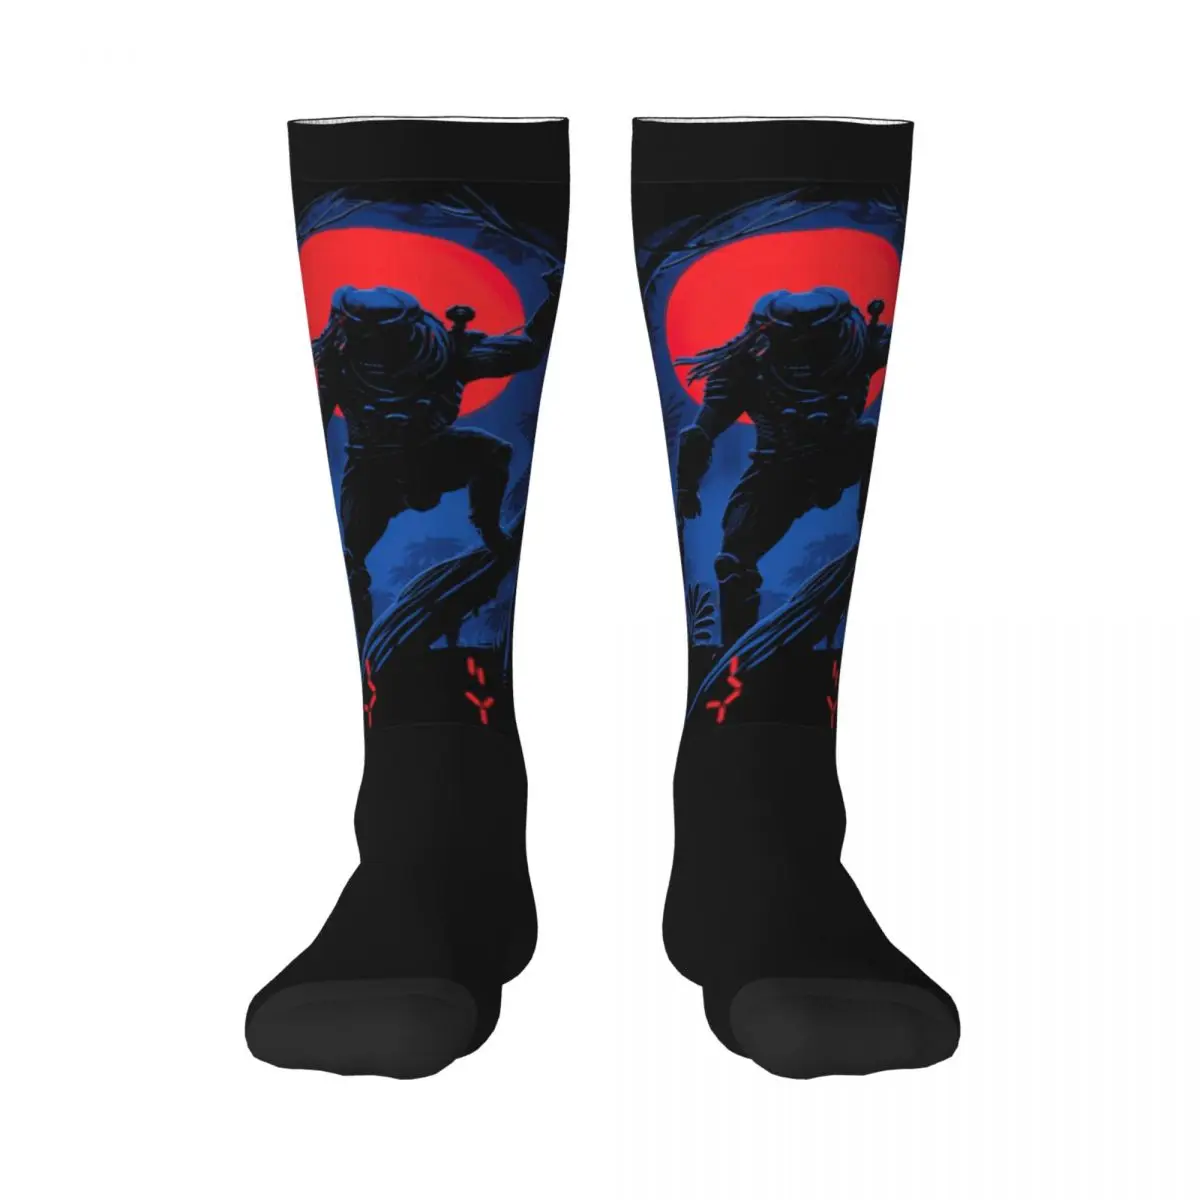 

Hot Sale Predator Movie Alien 14 Adult Stockings Good breathability INS style Compression Socks Funny Novelty